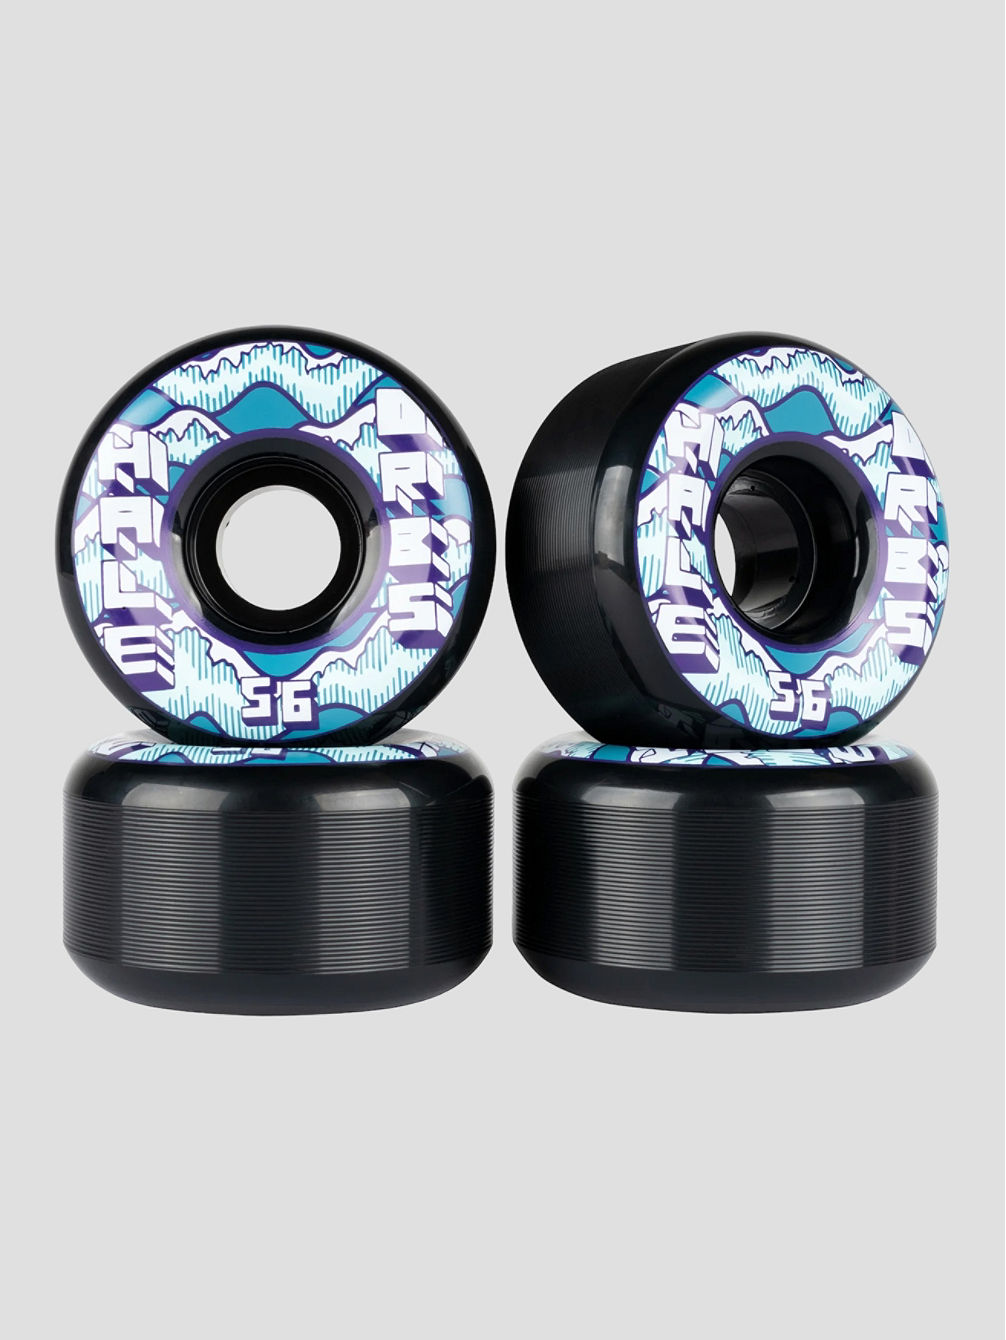 Orbs Shawn Hale Specters Conica 99A 56mm Hjul